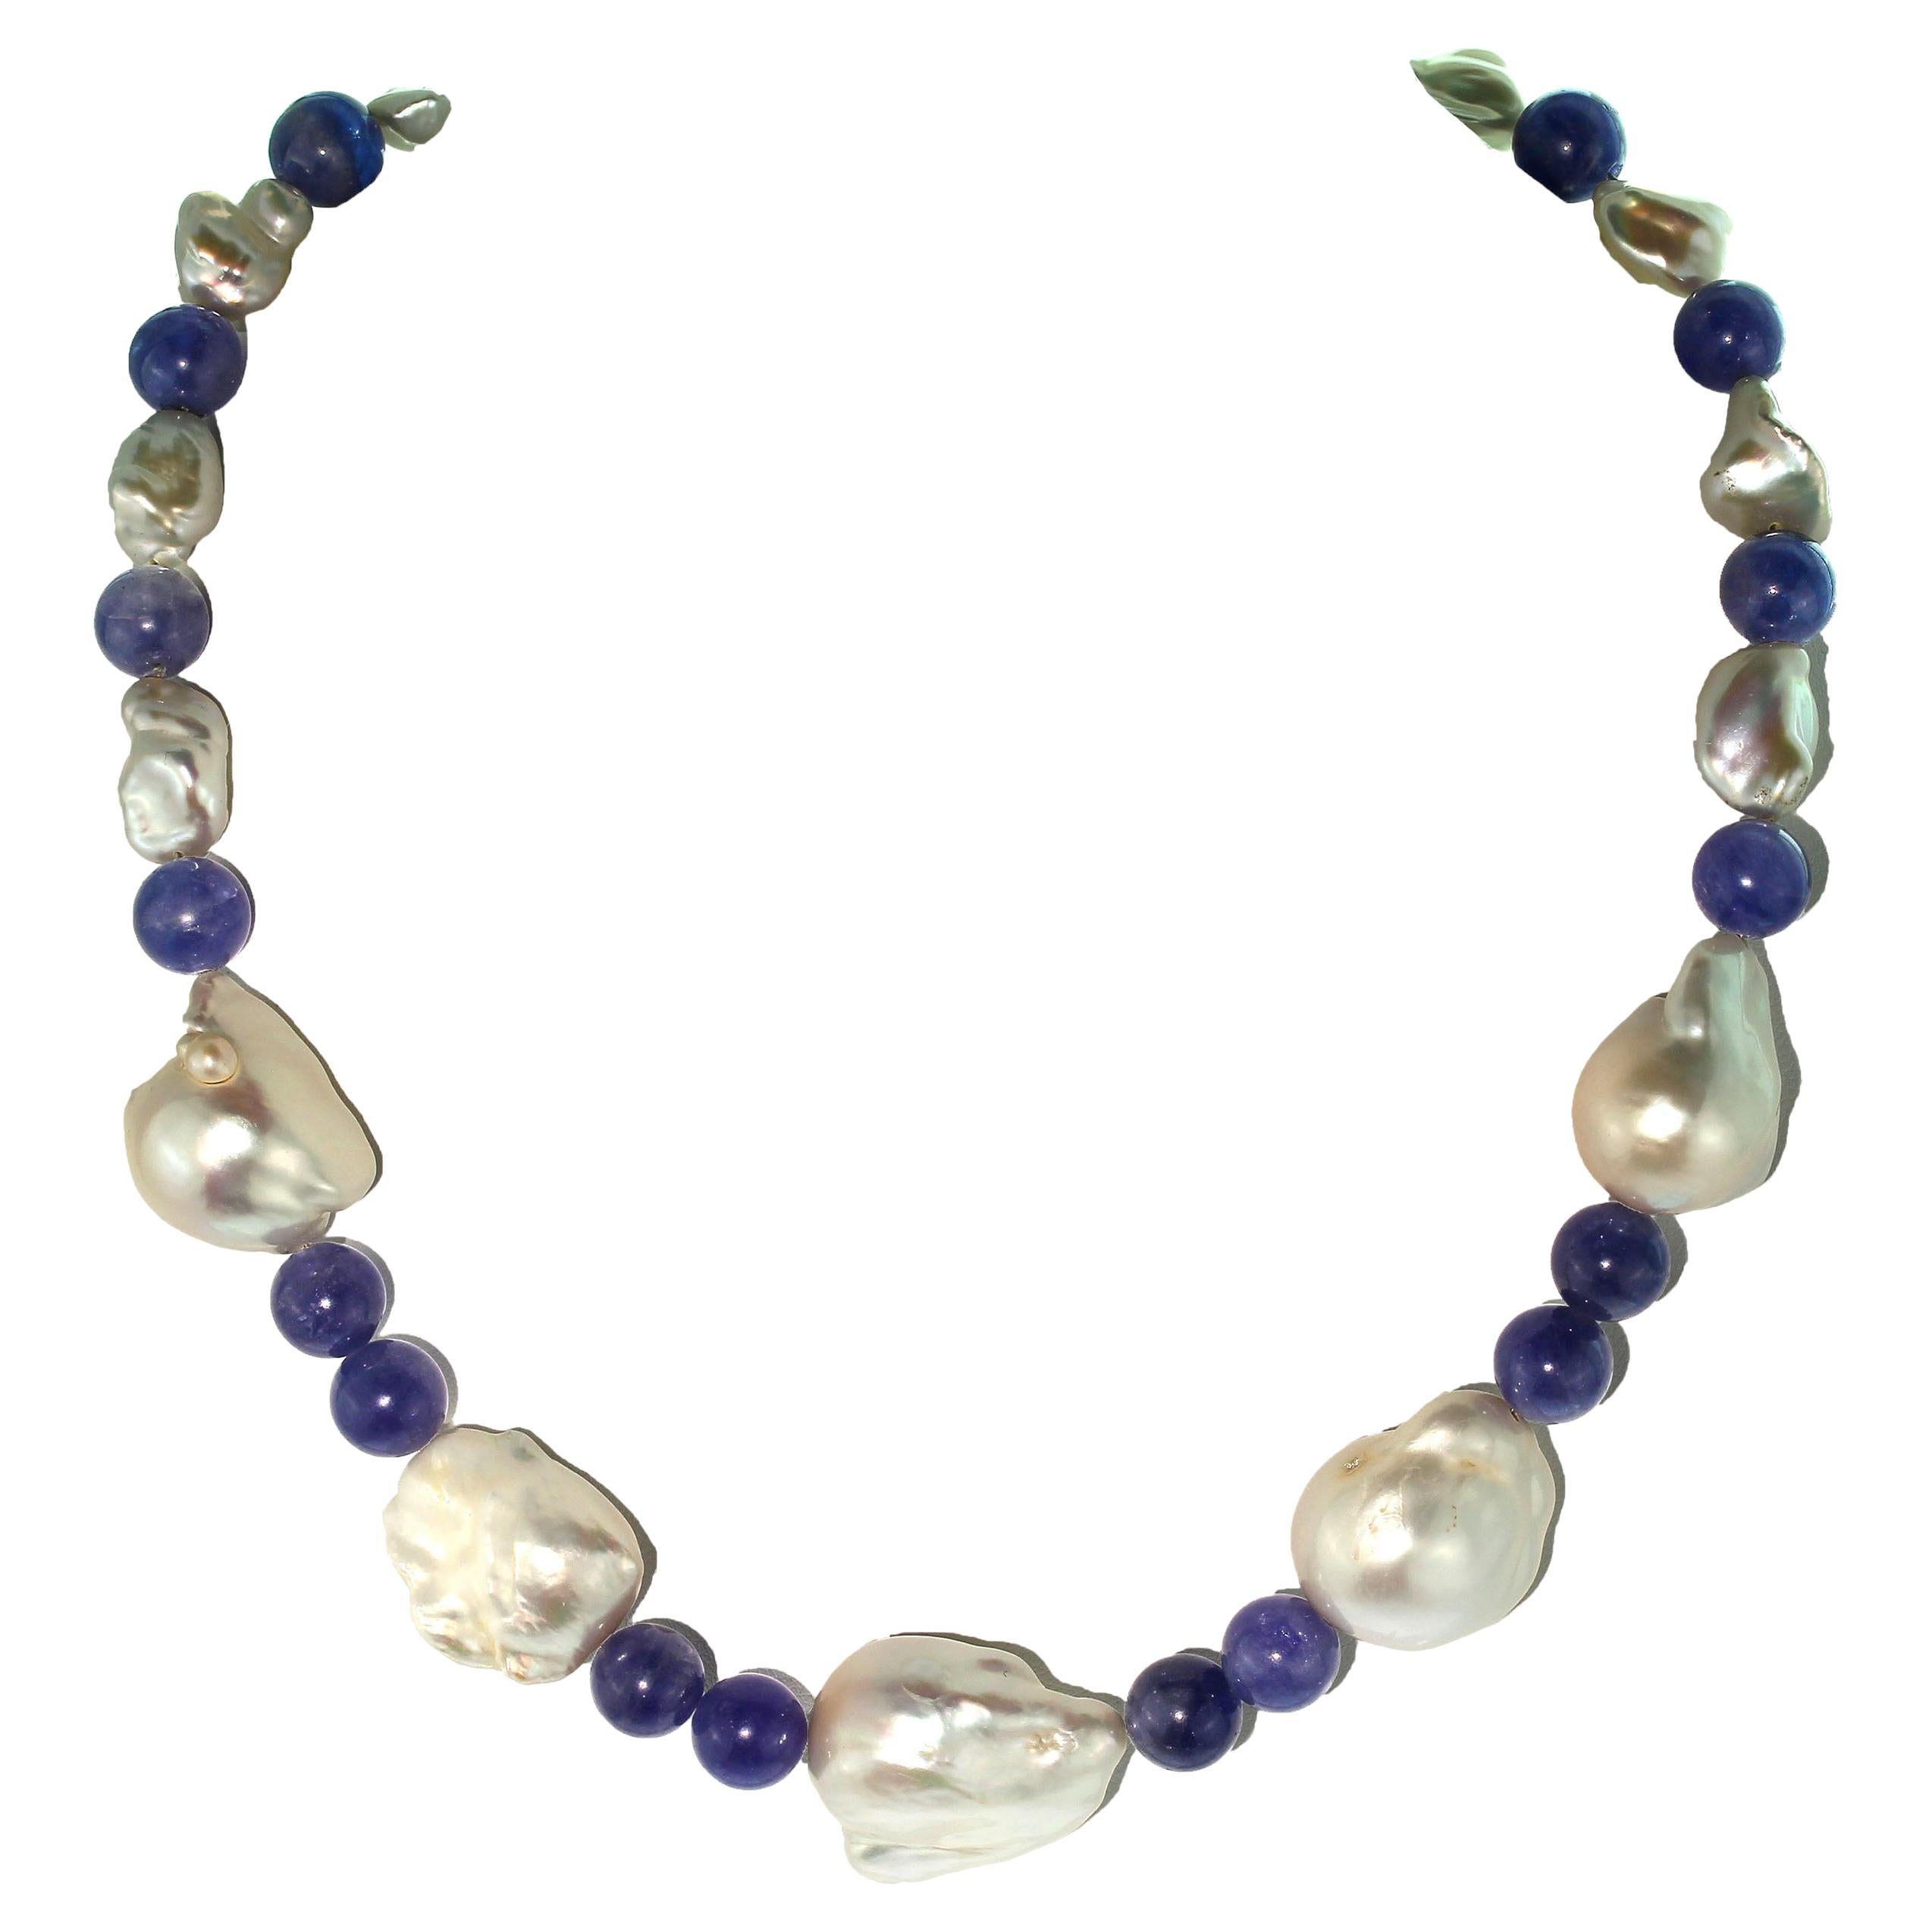 Keep Calm and Wear Pearls

One of a kind necklace featuring iridescent white Baroque Pearls, white Keshi Pearls, and round 10 MM highly polished Tanzanite. The gorgeous iridescent Baroque Pearls play off of the highly polished blue/purple Tanzanite